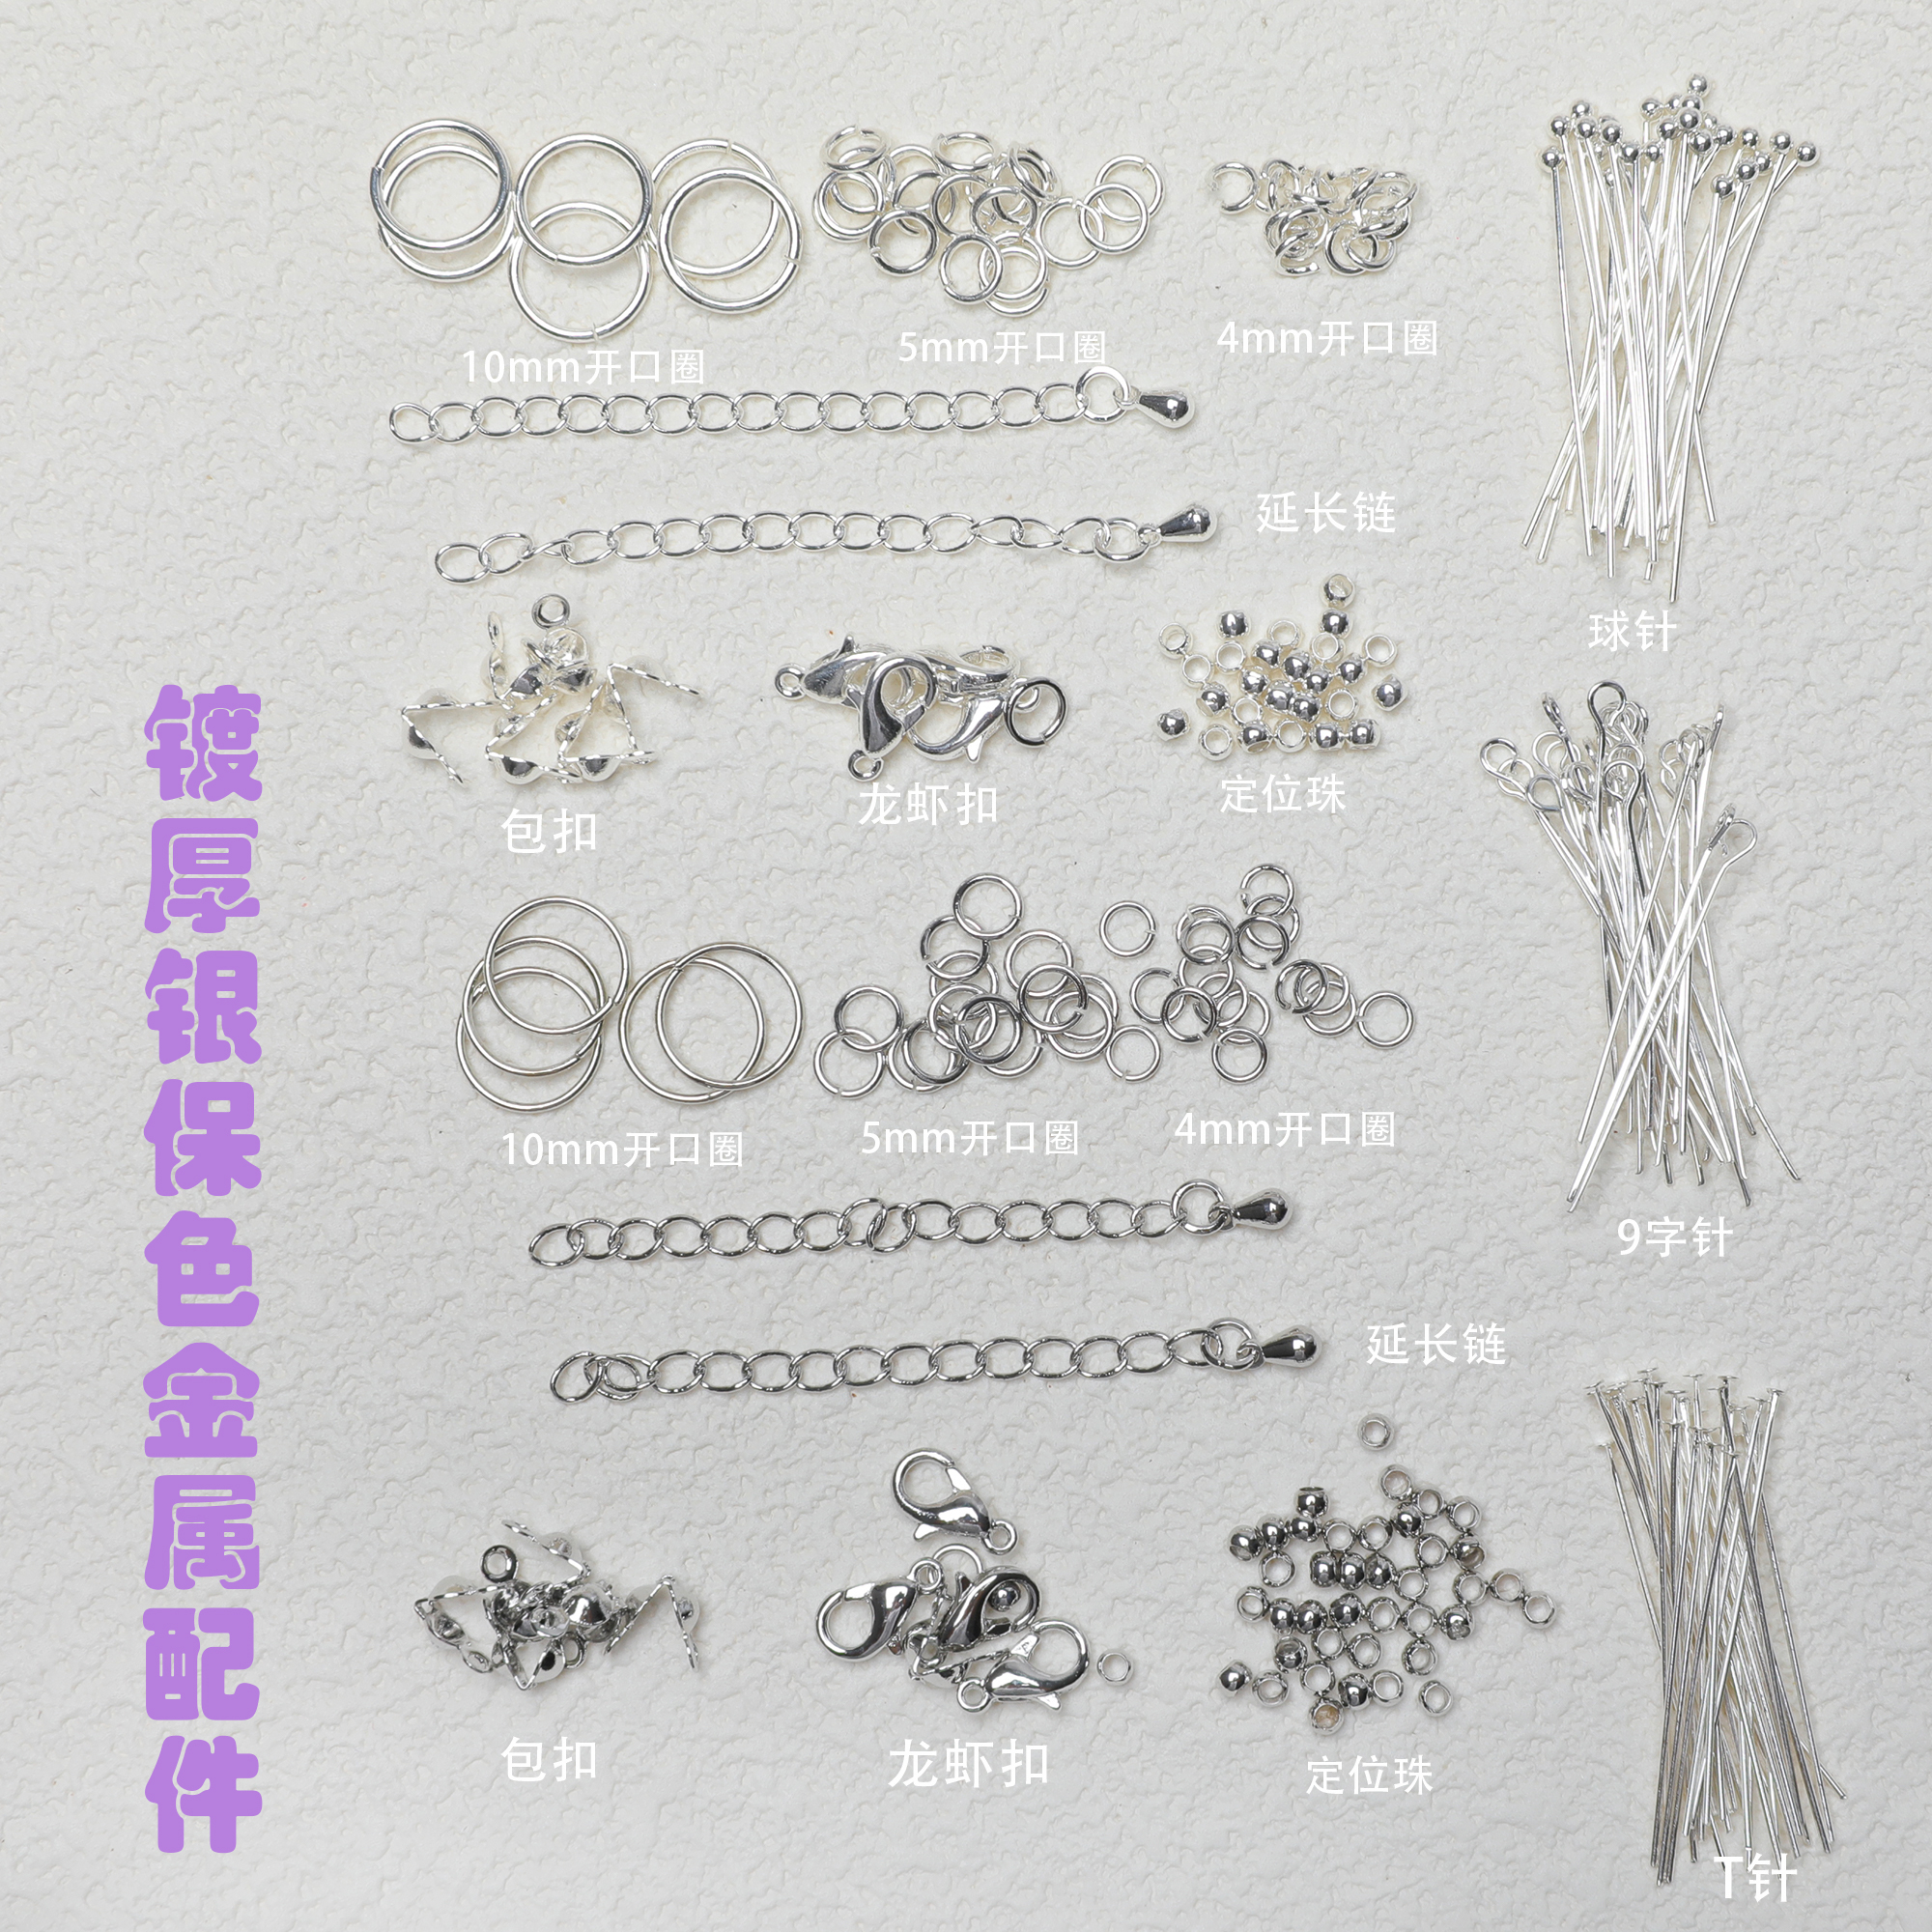 Aurora plated thick silver color retaining finishing material lobster clasp bag buckle opening ring 9-pin diy bracelet accessories